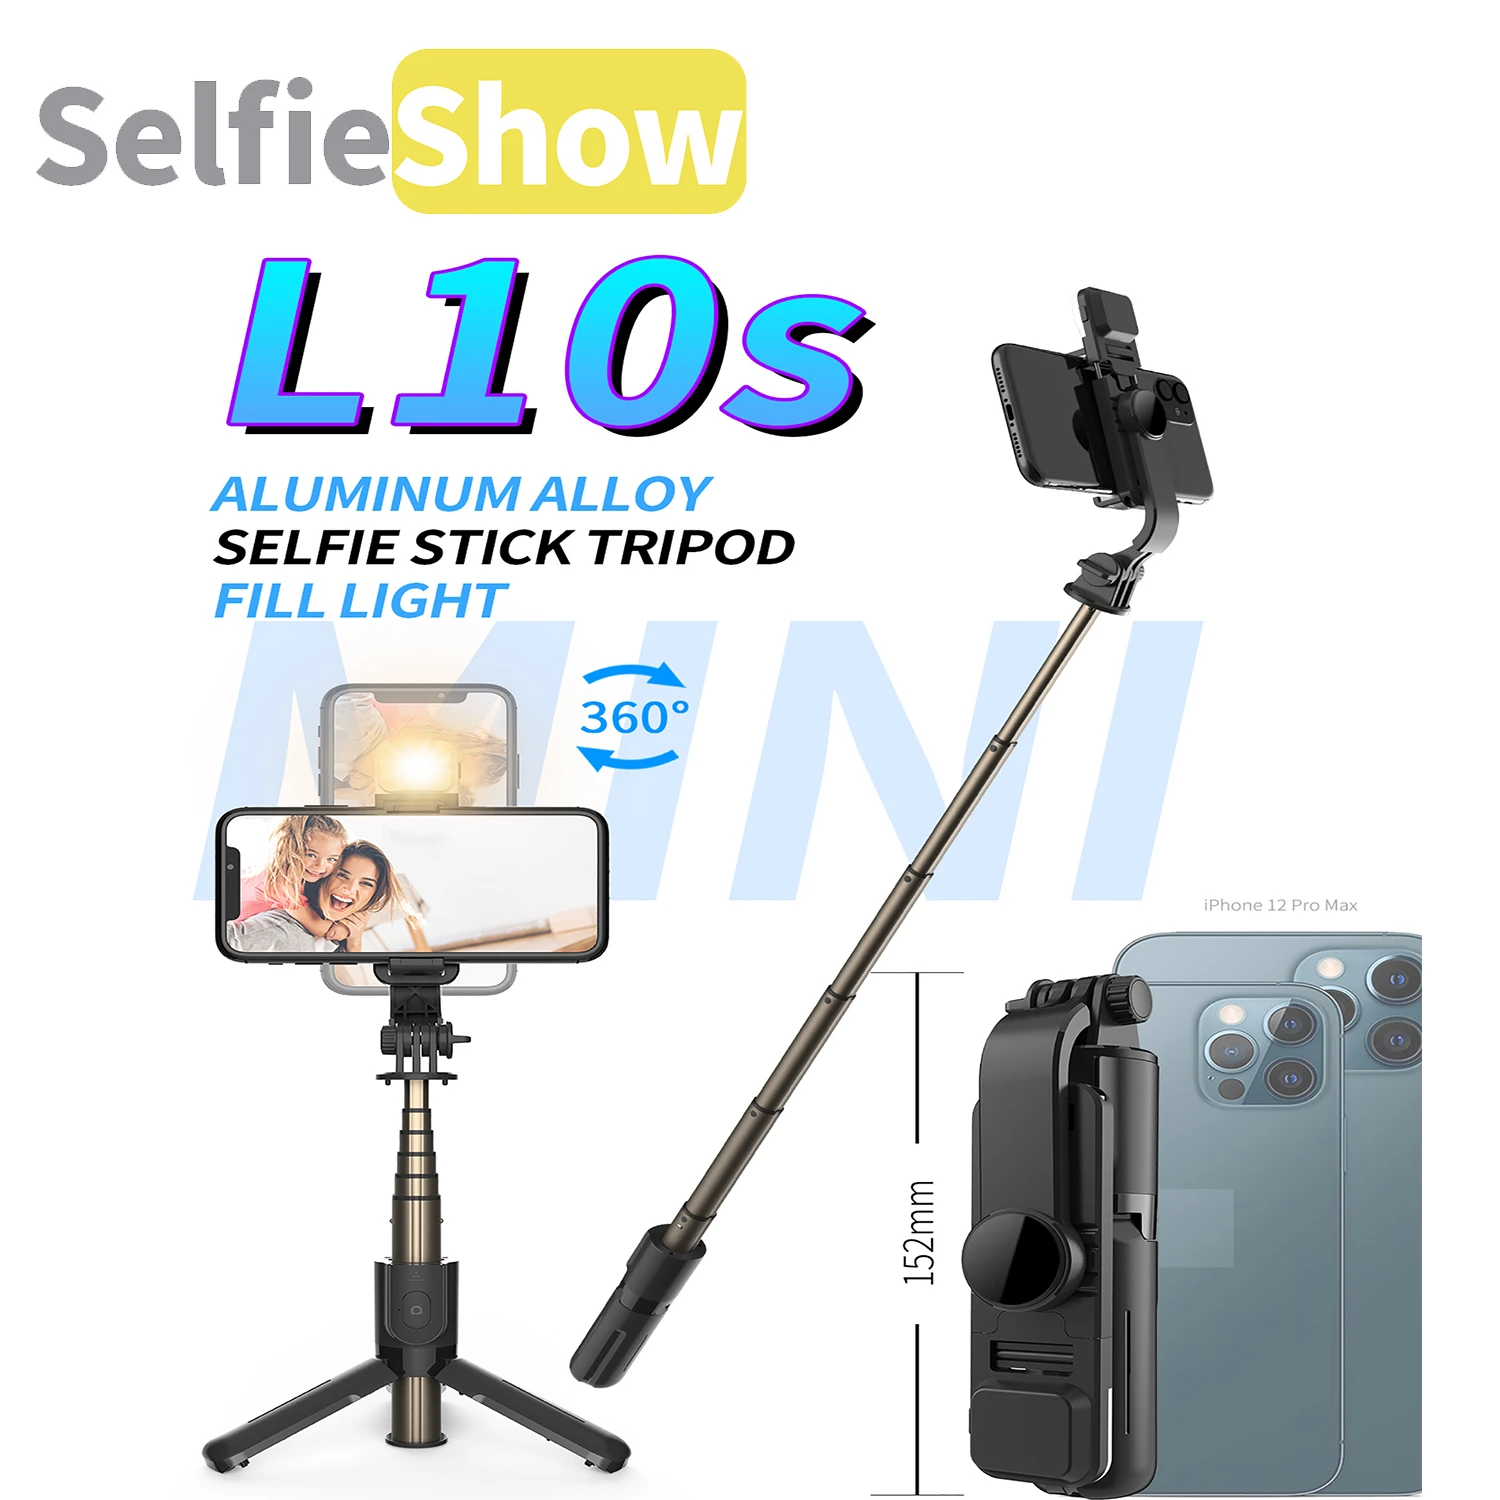 

Selfieshow Mini Bluetooth Tripod Selfie Stick Fill Light Wireless Remote Extendable Monopod Stand Cell Phone For IOS Android